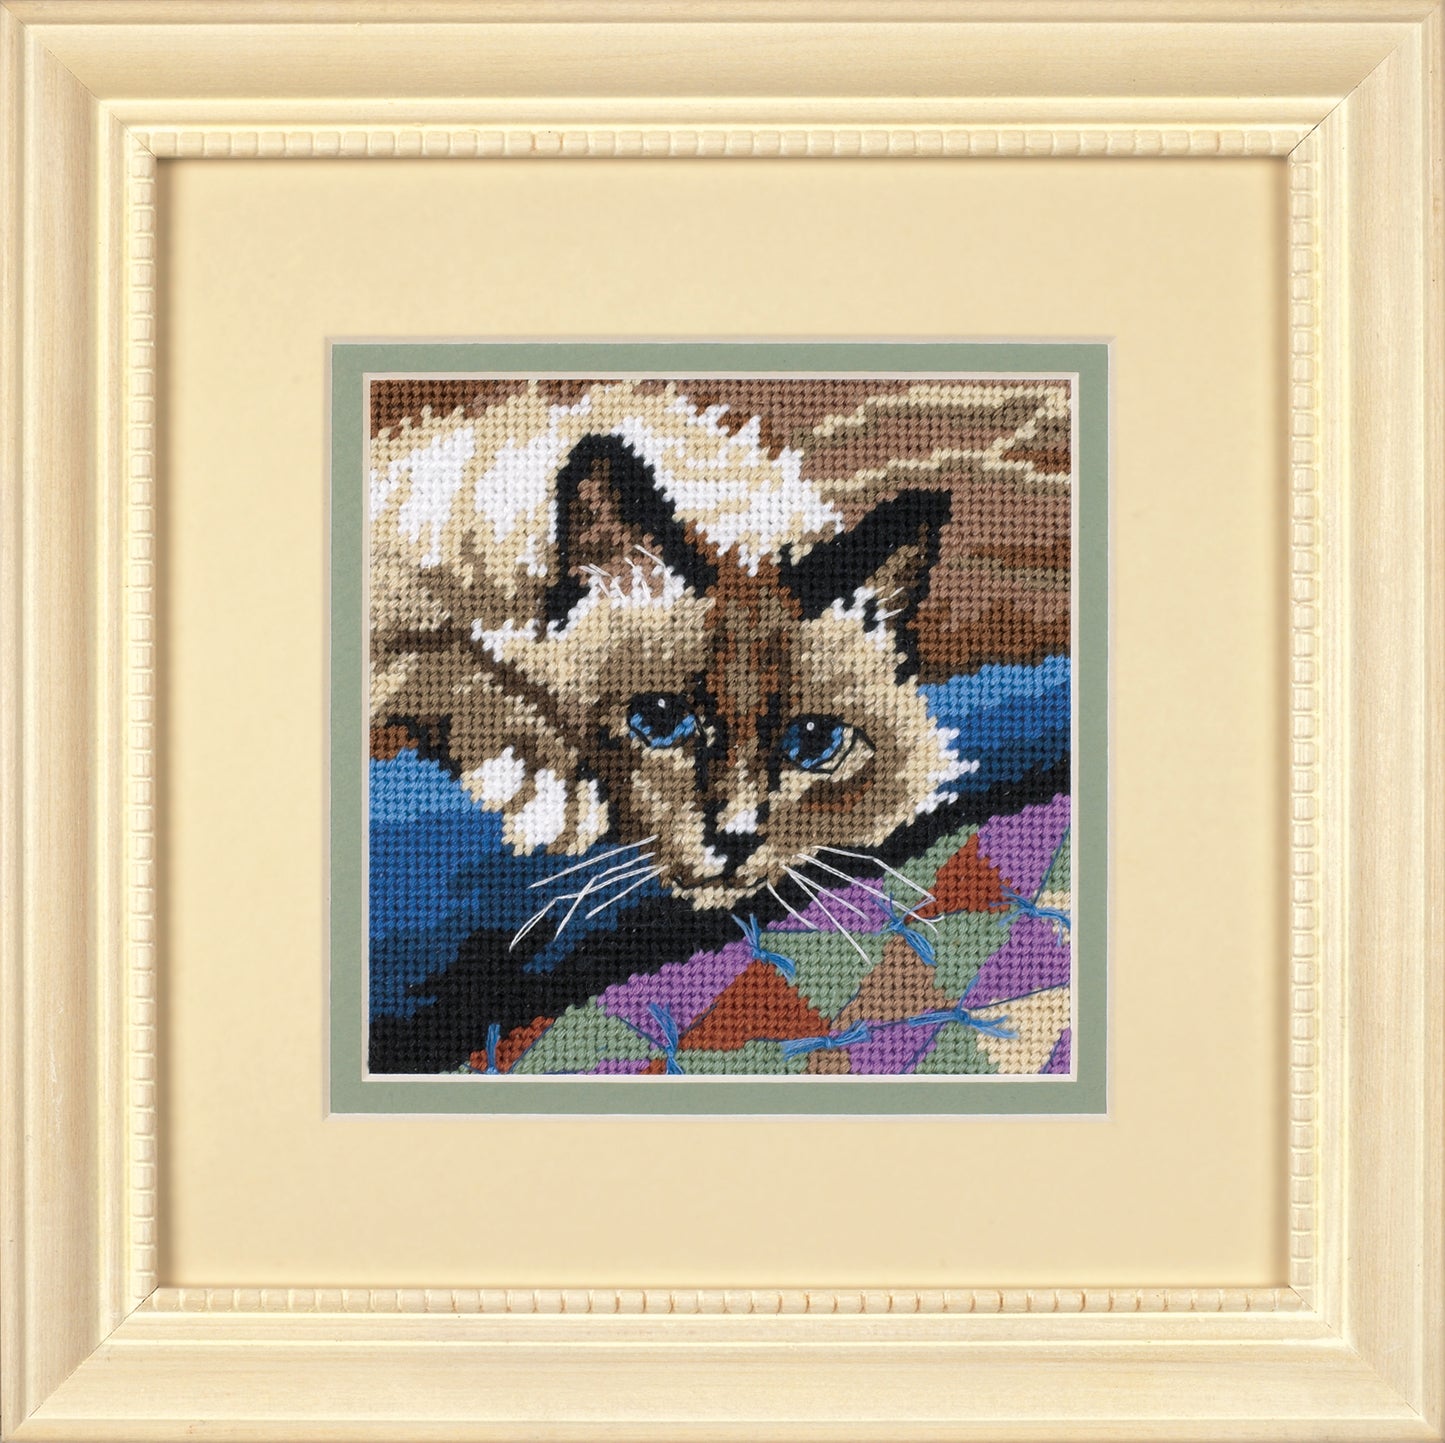 Cuddly Cat Needlepoint Tapestry Kit - Dimensions D07228